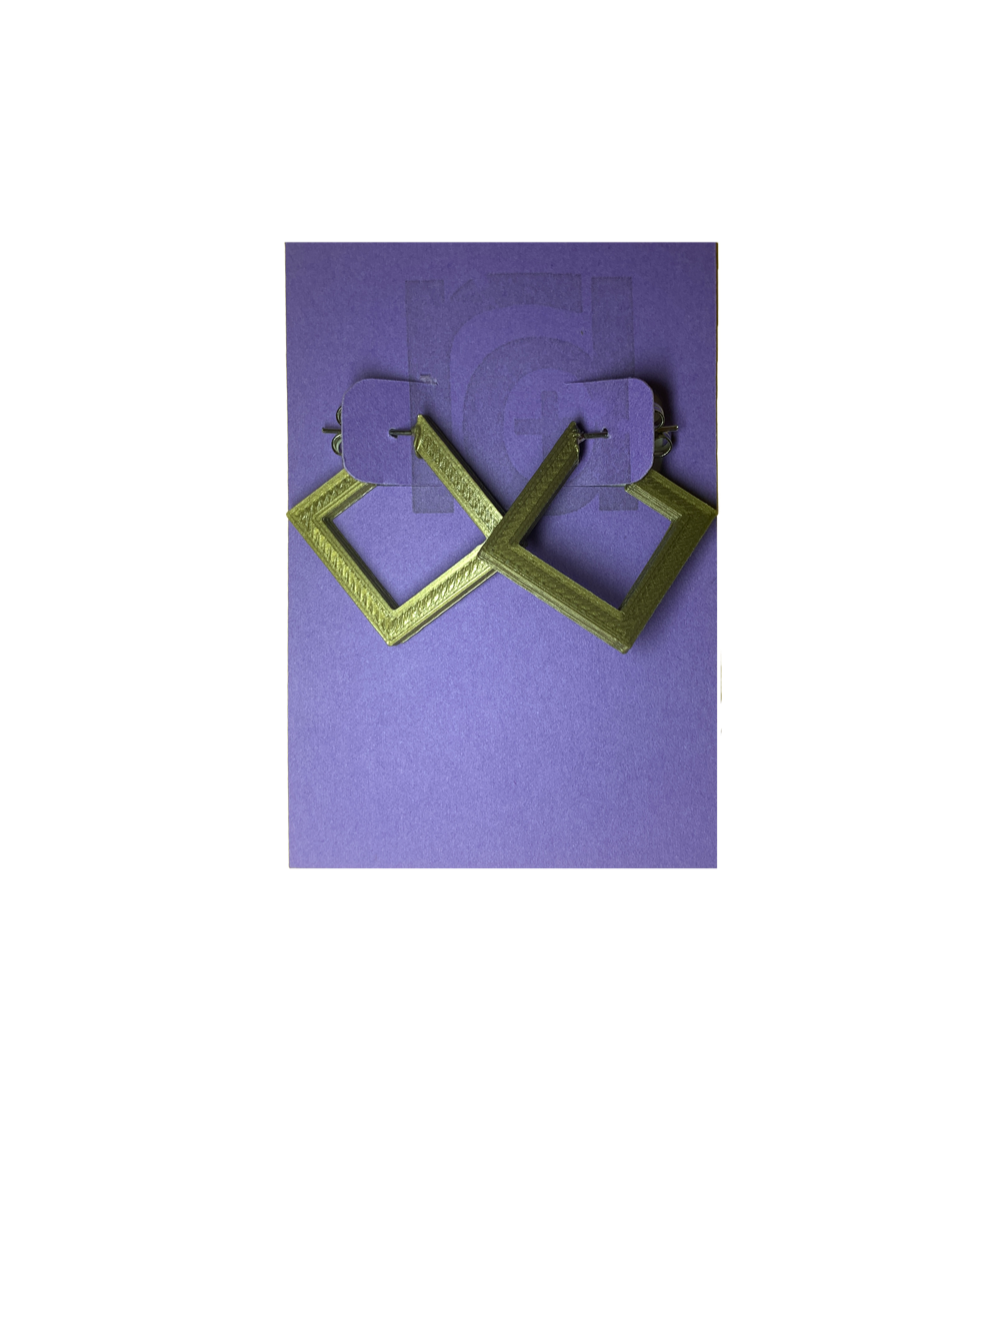 On a bight purple R+D card are two 3D printed earrings. They are hoops that are in the shape of squares. These are printed in a shiny gold.